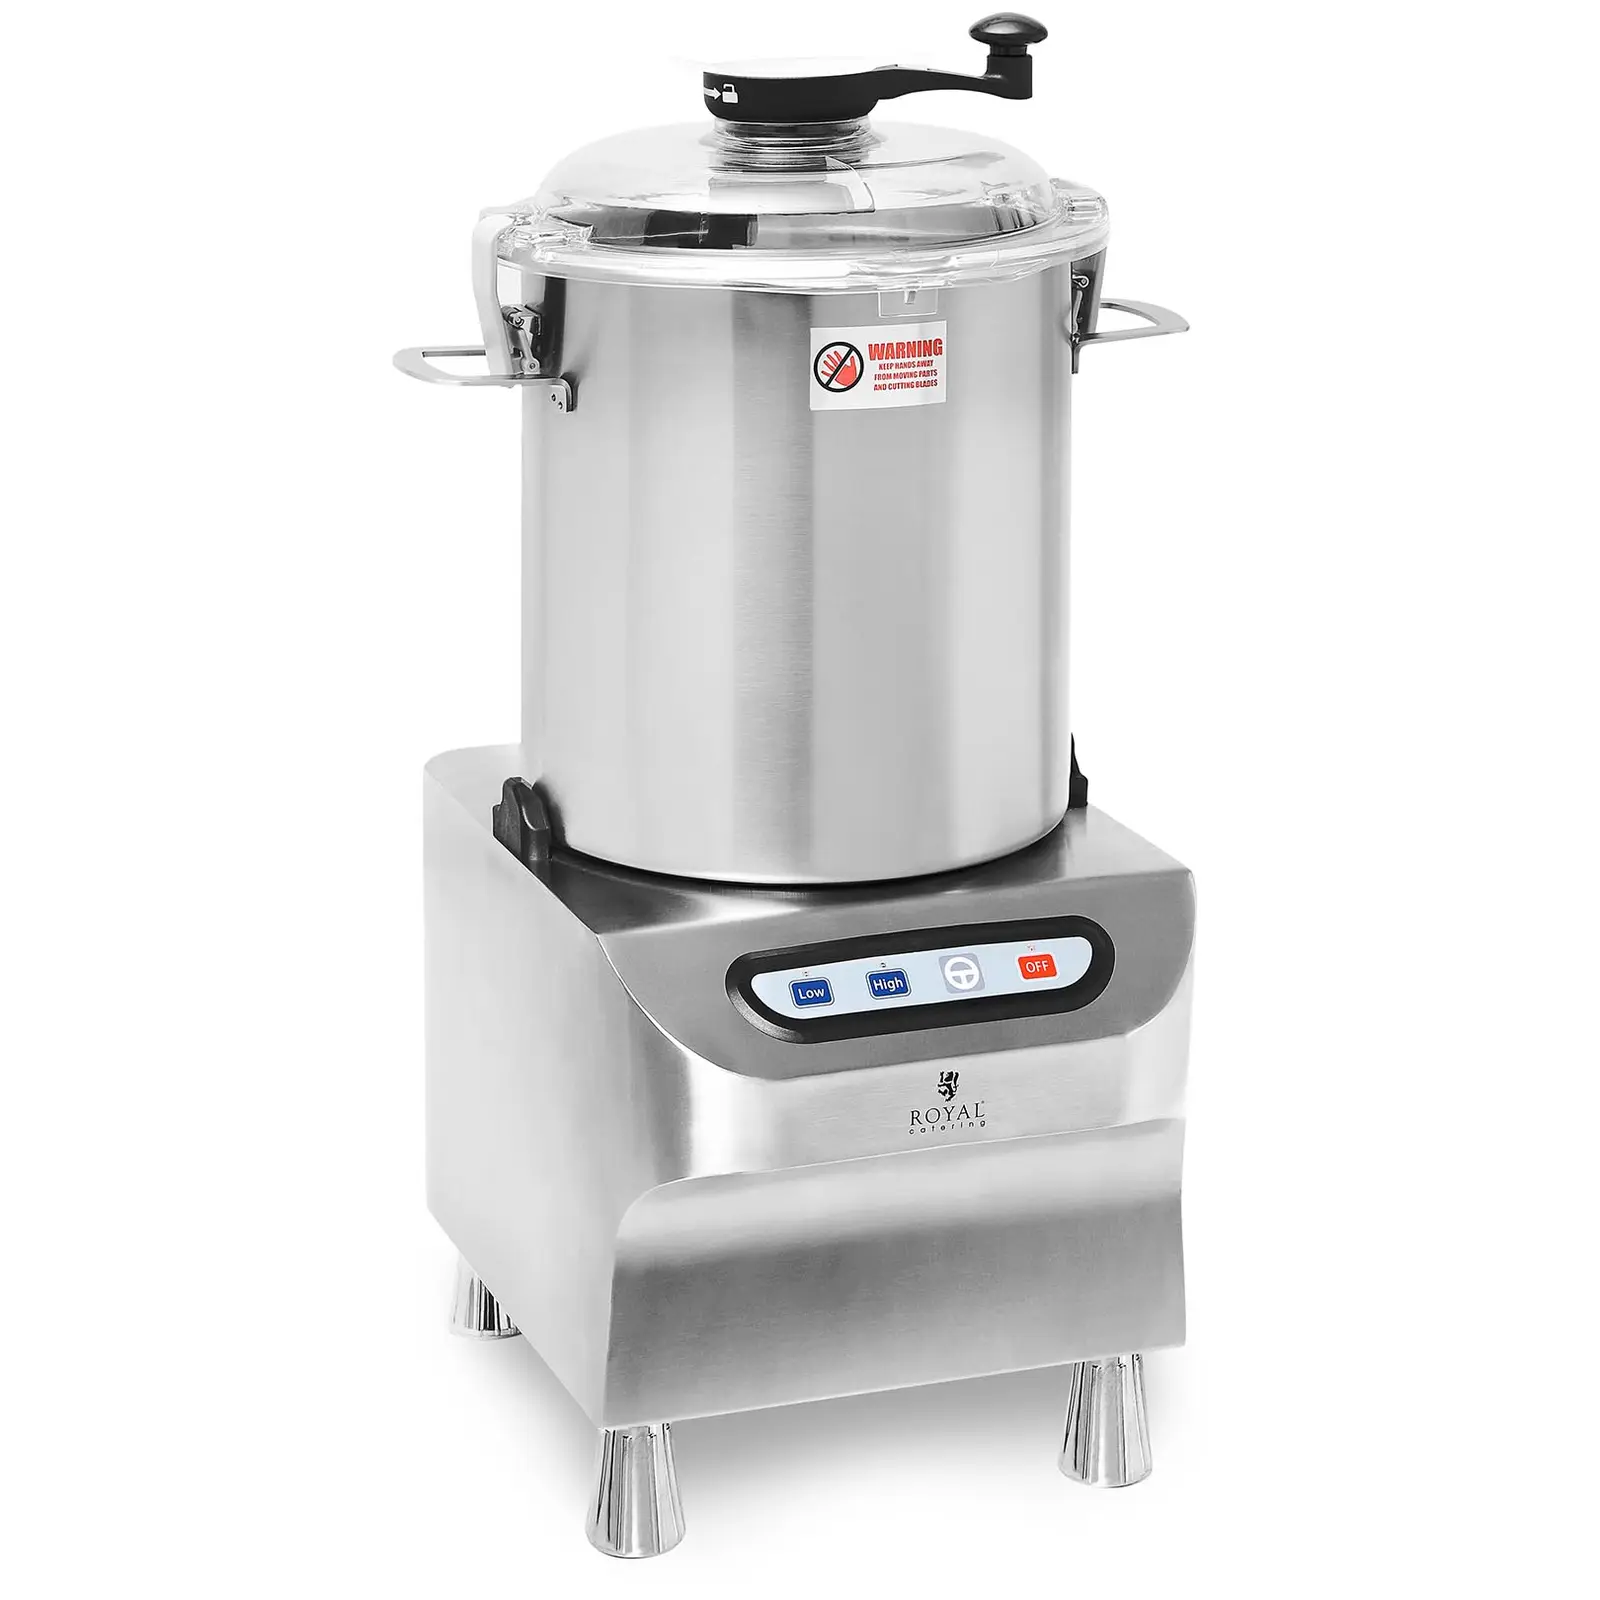 Smulkinimo dubuo - 1500/2200 aps./min. - „Royal Catering“ - 18 l